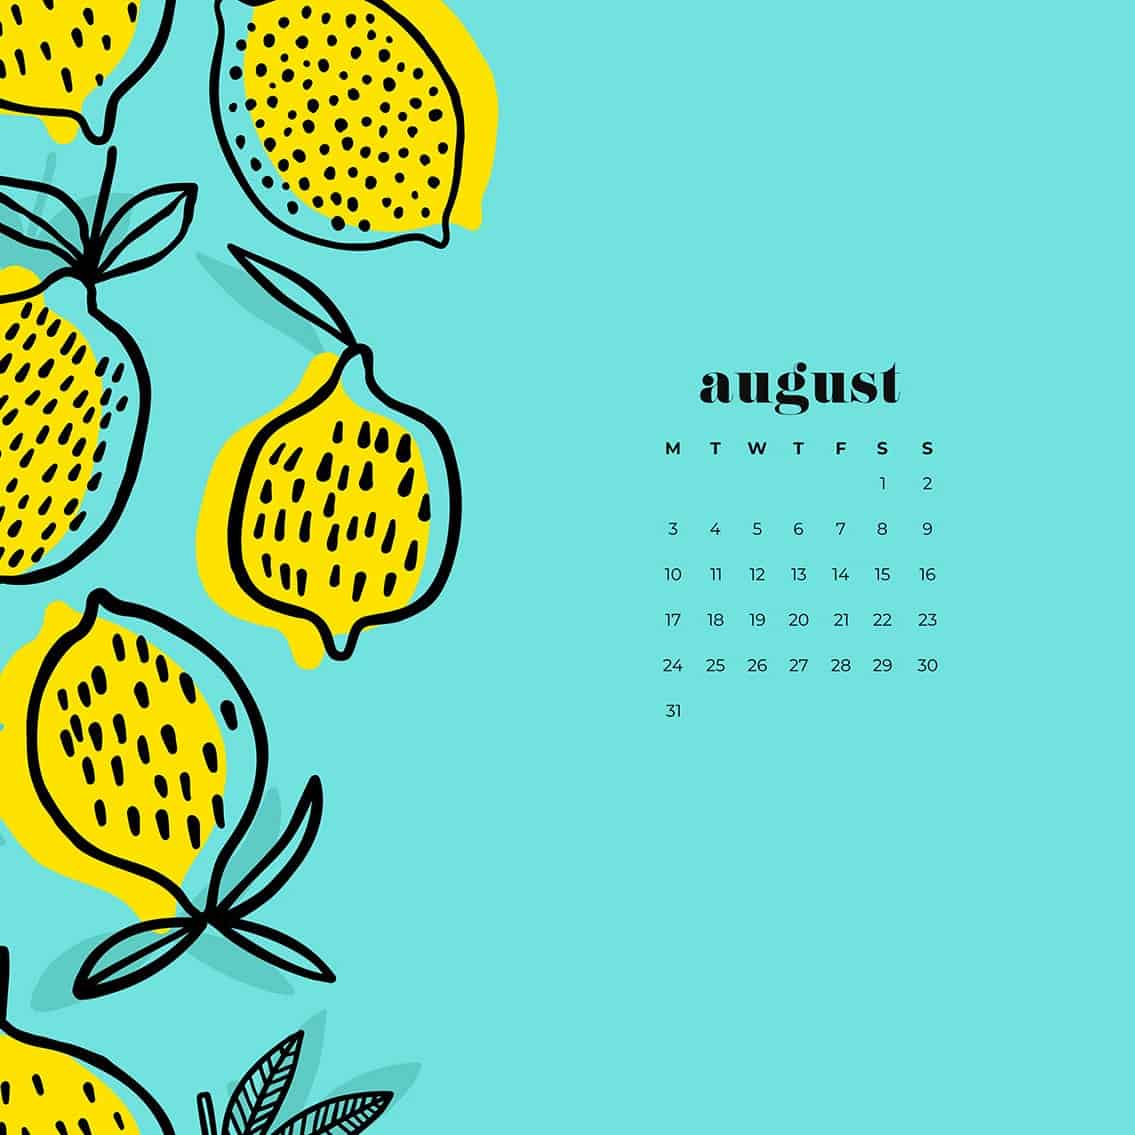 FREE August wallpapers — 14 to choose from for desktop and phone!